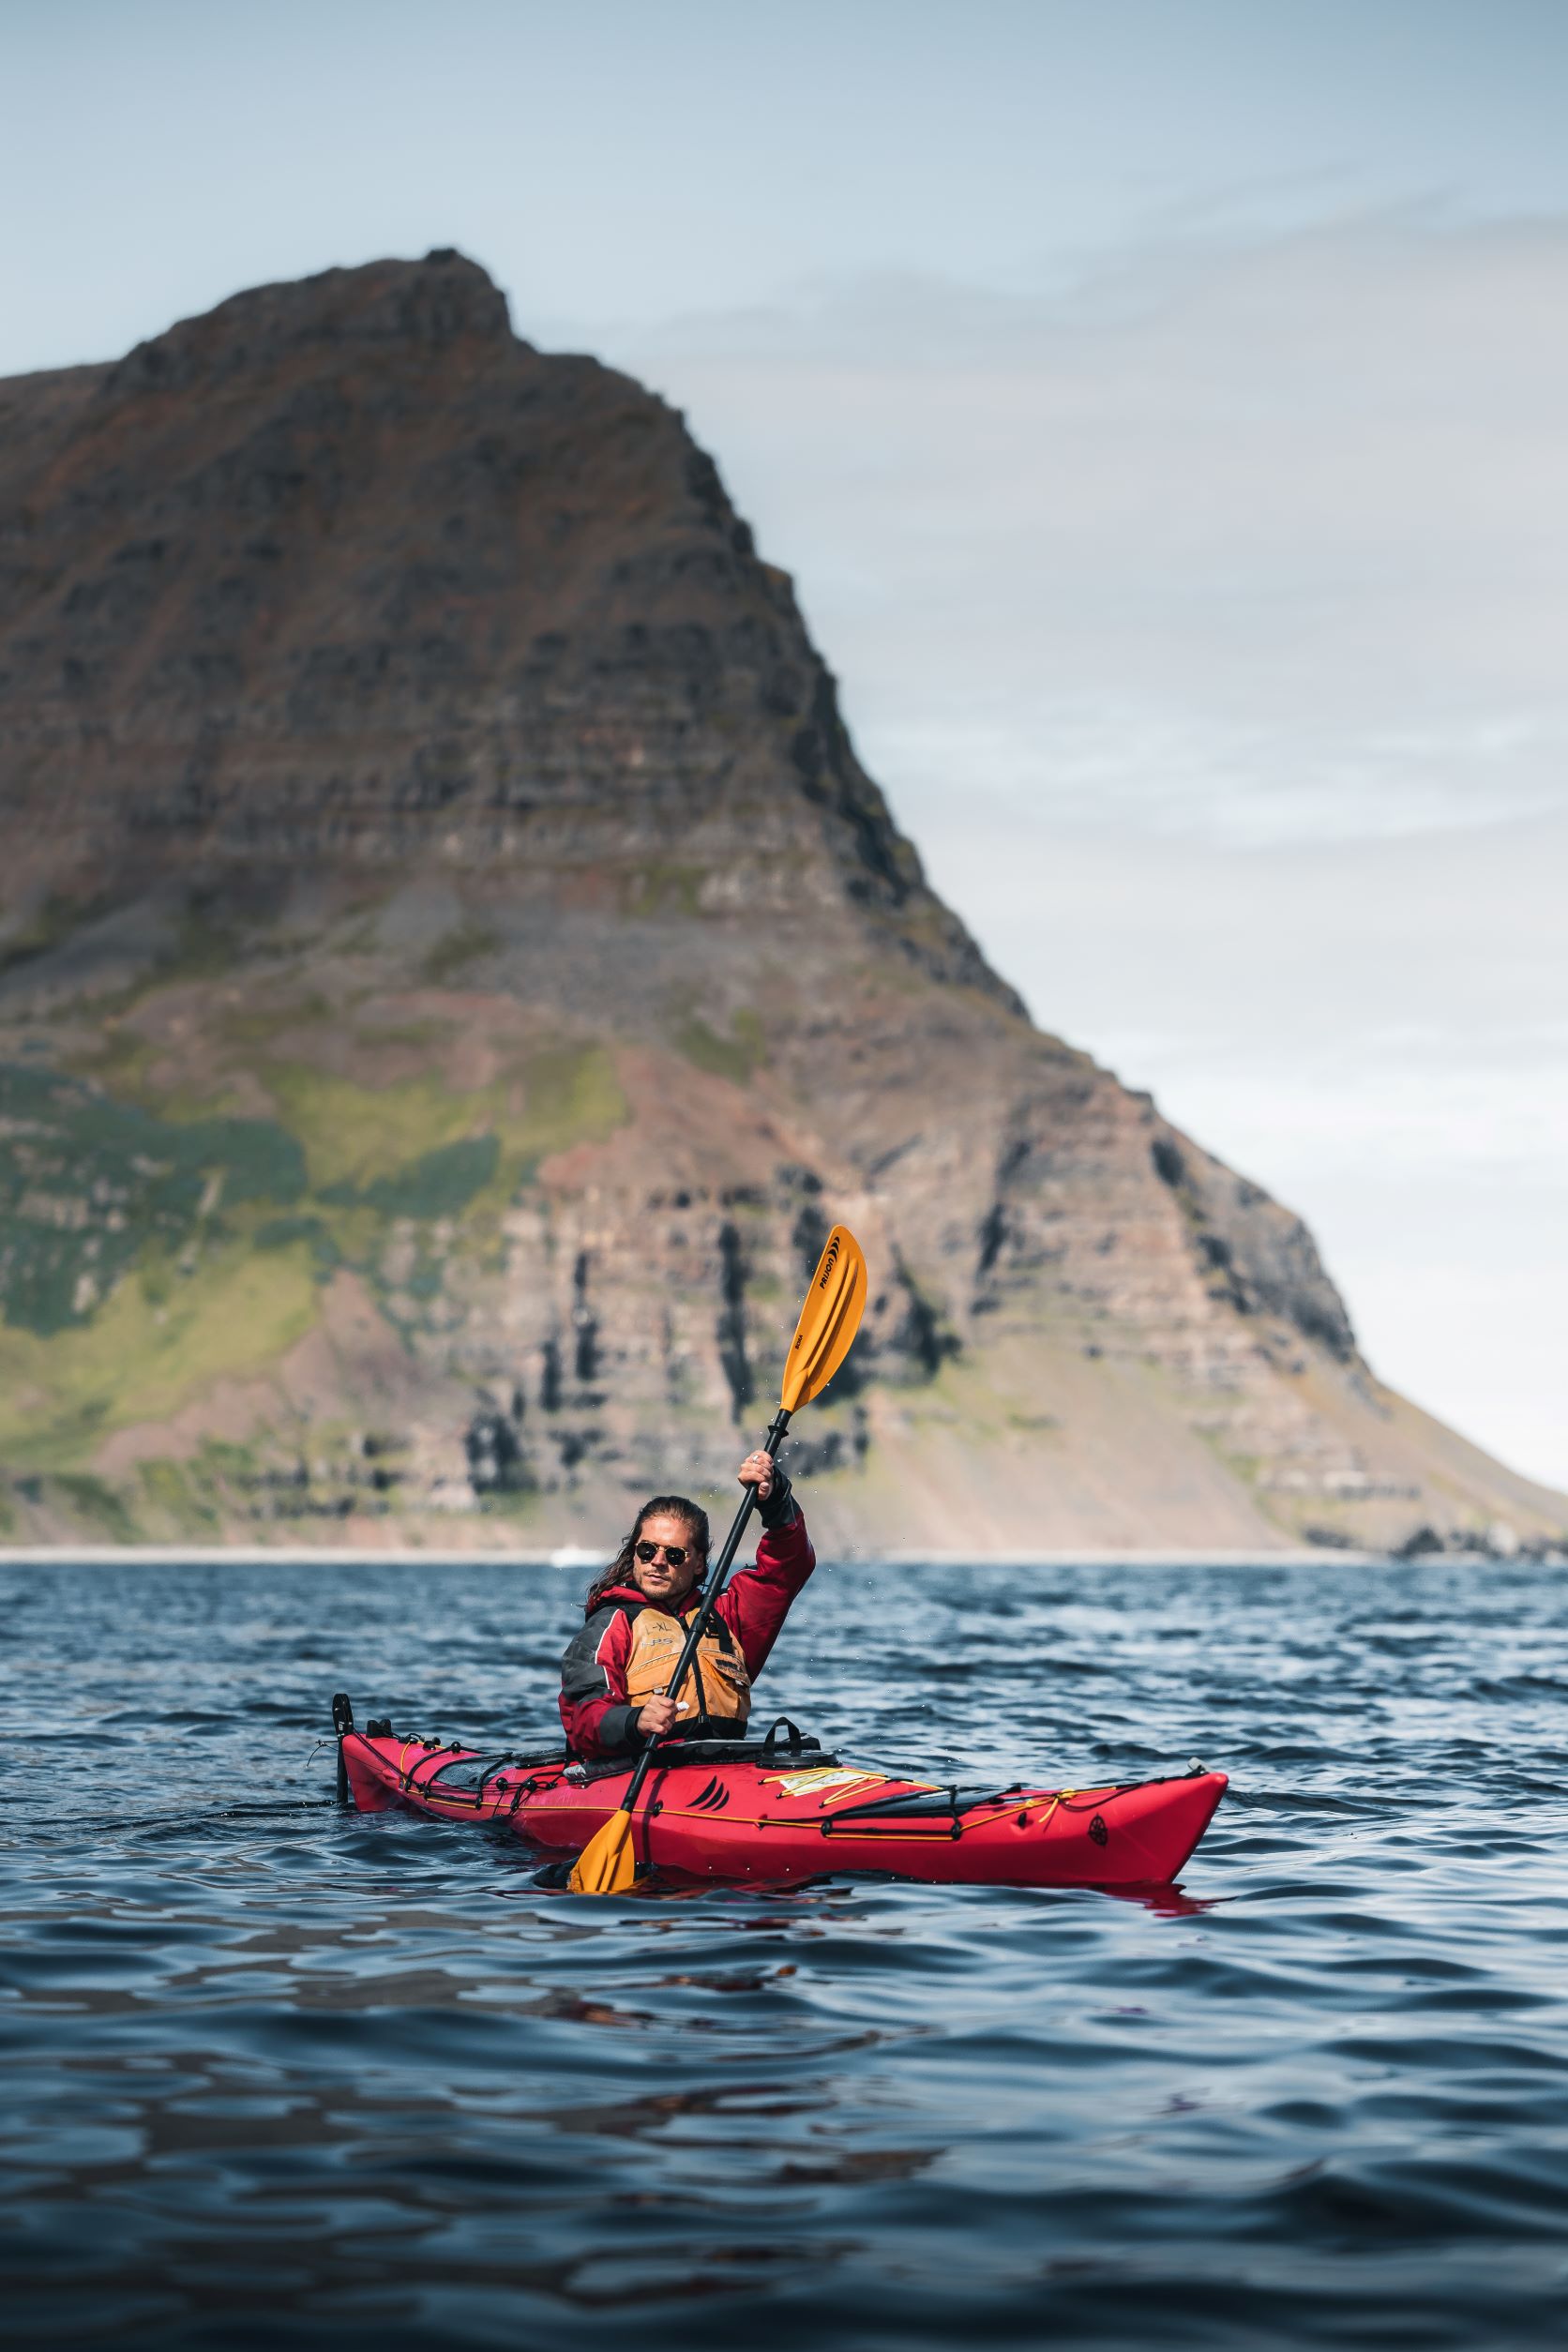 Rurik Gislason in a kayak on a fjord, with a mountain rising in the background